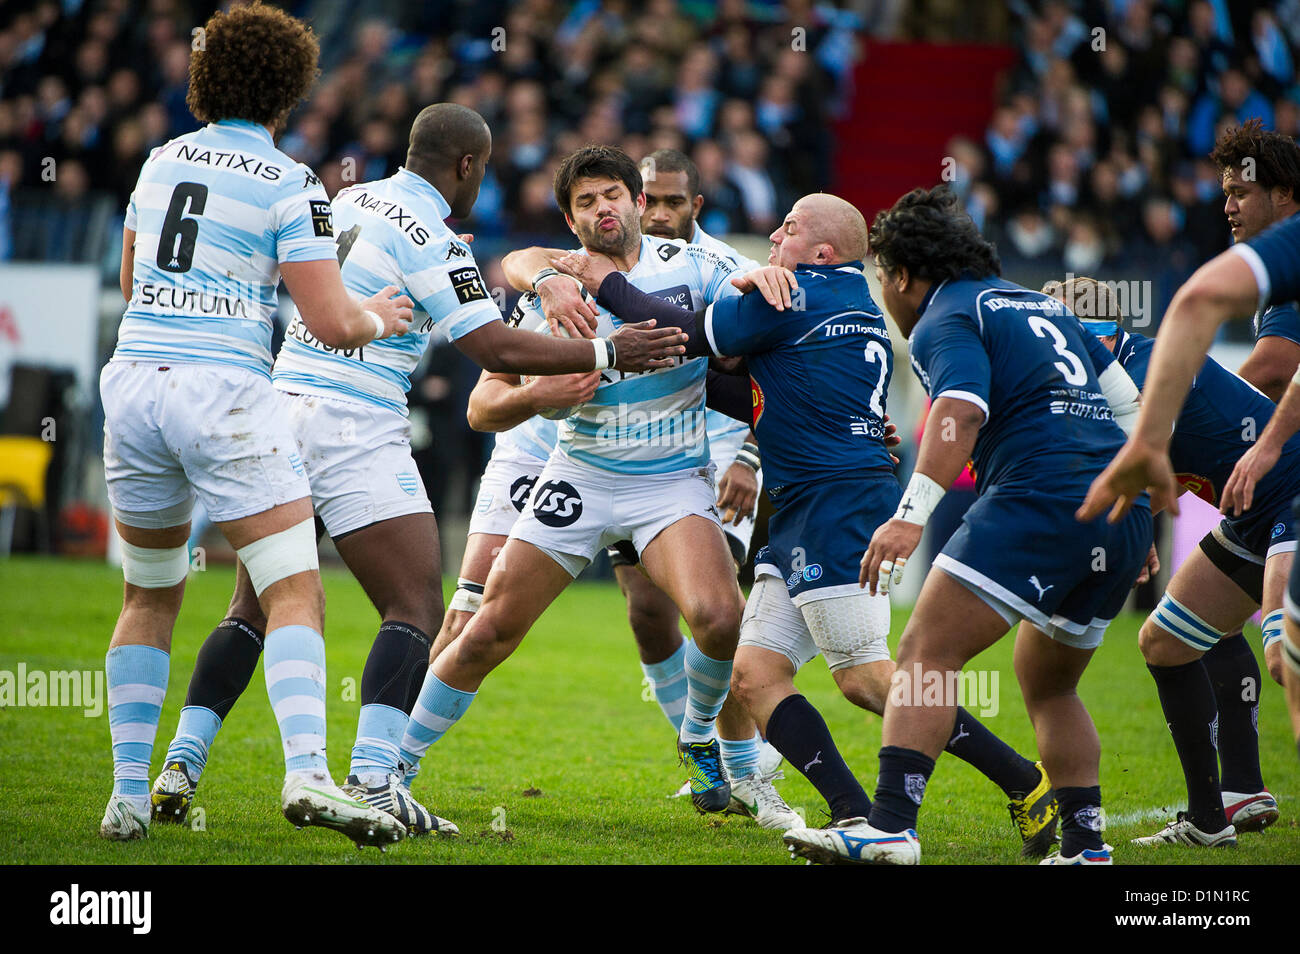 Colombes, France. 30 Dec. 2012. Rugby, Top 14. Racing CF vs SU Agen : 40-6.  Photo Frederic Augendre/Alamy Live News Stock Photo - Alamy